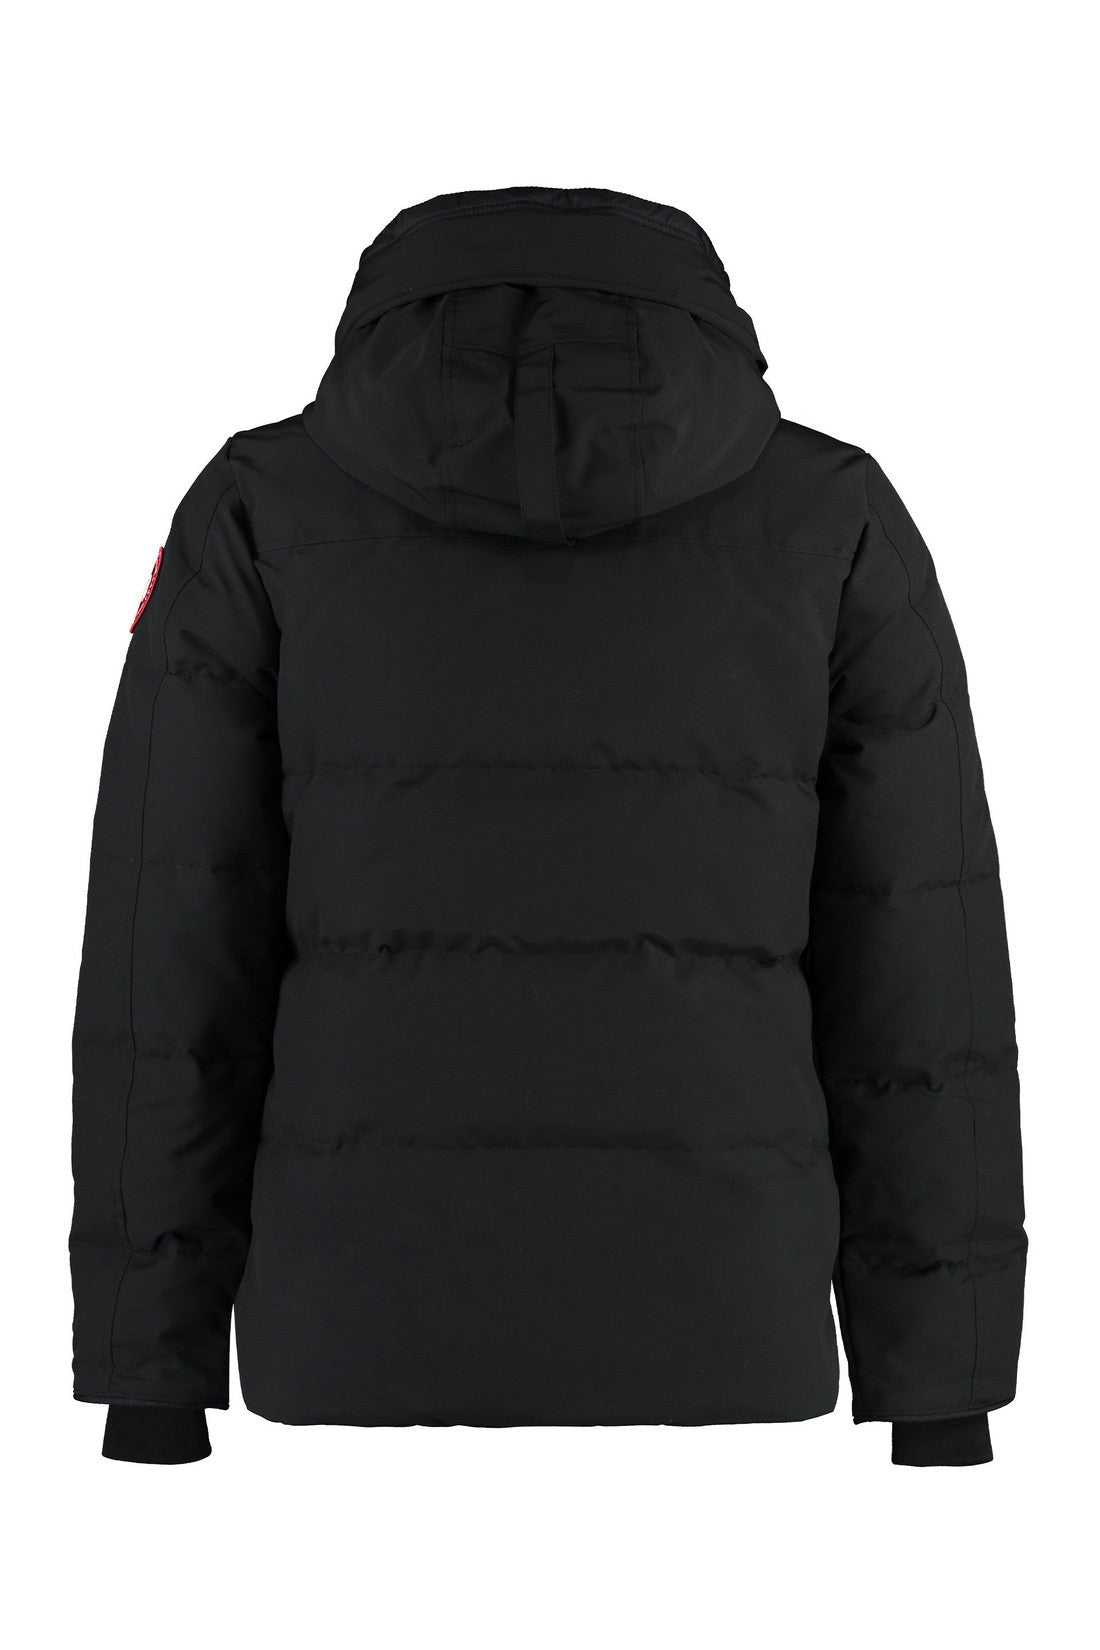 Canada Goose-OUTLET-SALE-MacMillian hooded down jacket-ARCHIVIST